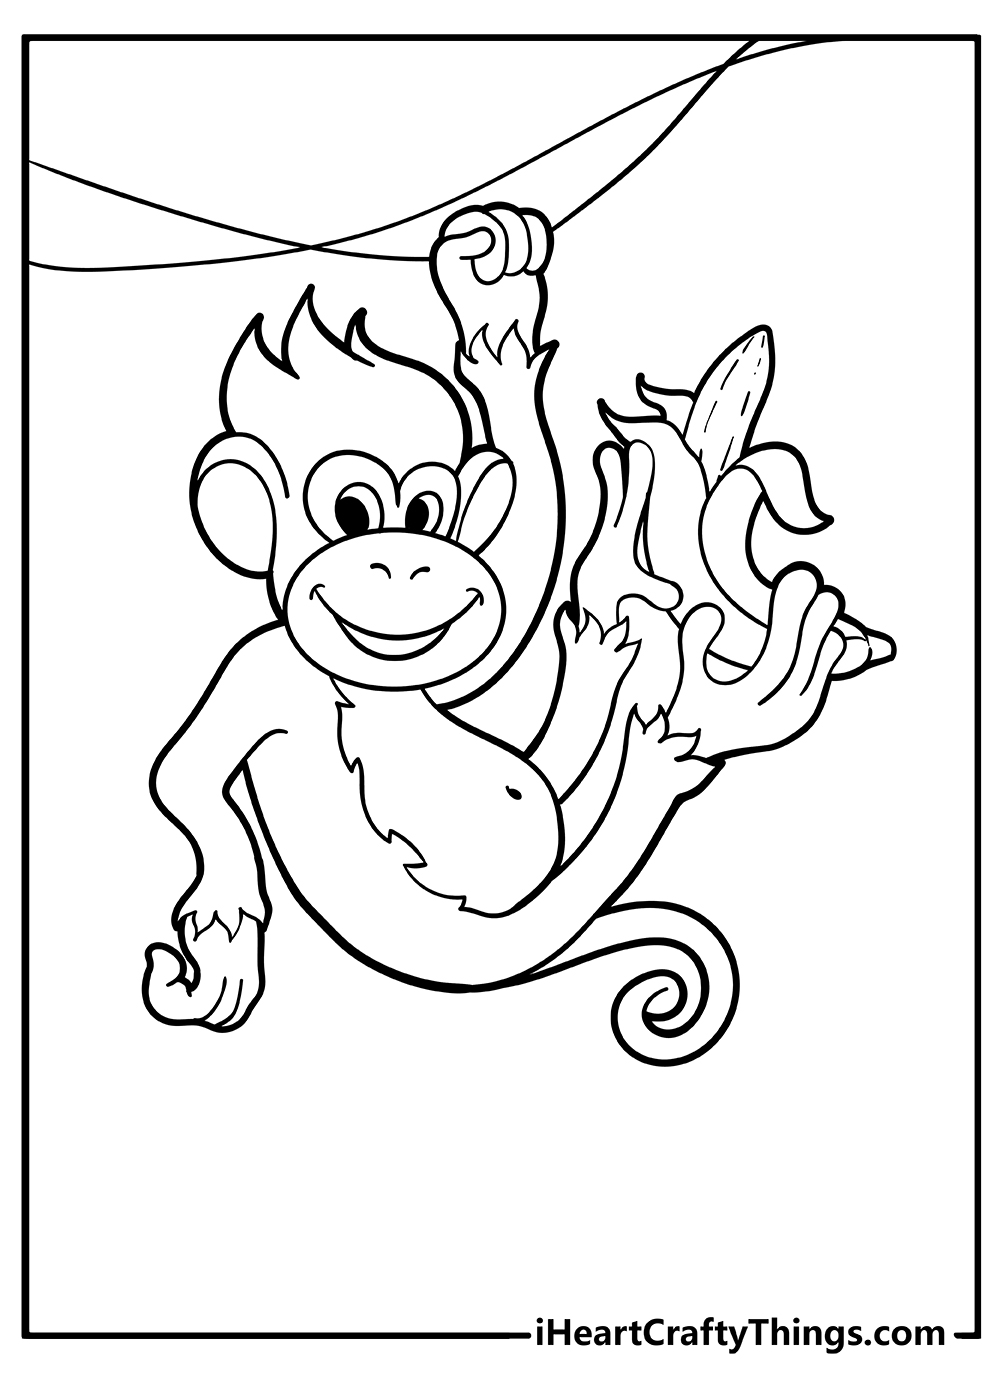 Monkey Coloring Pages for kids free download